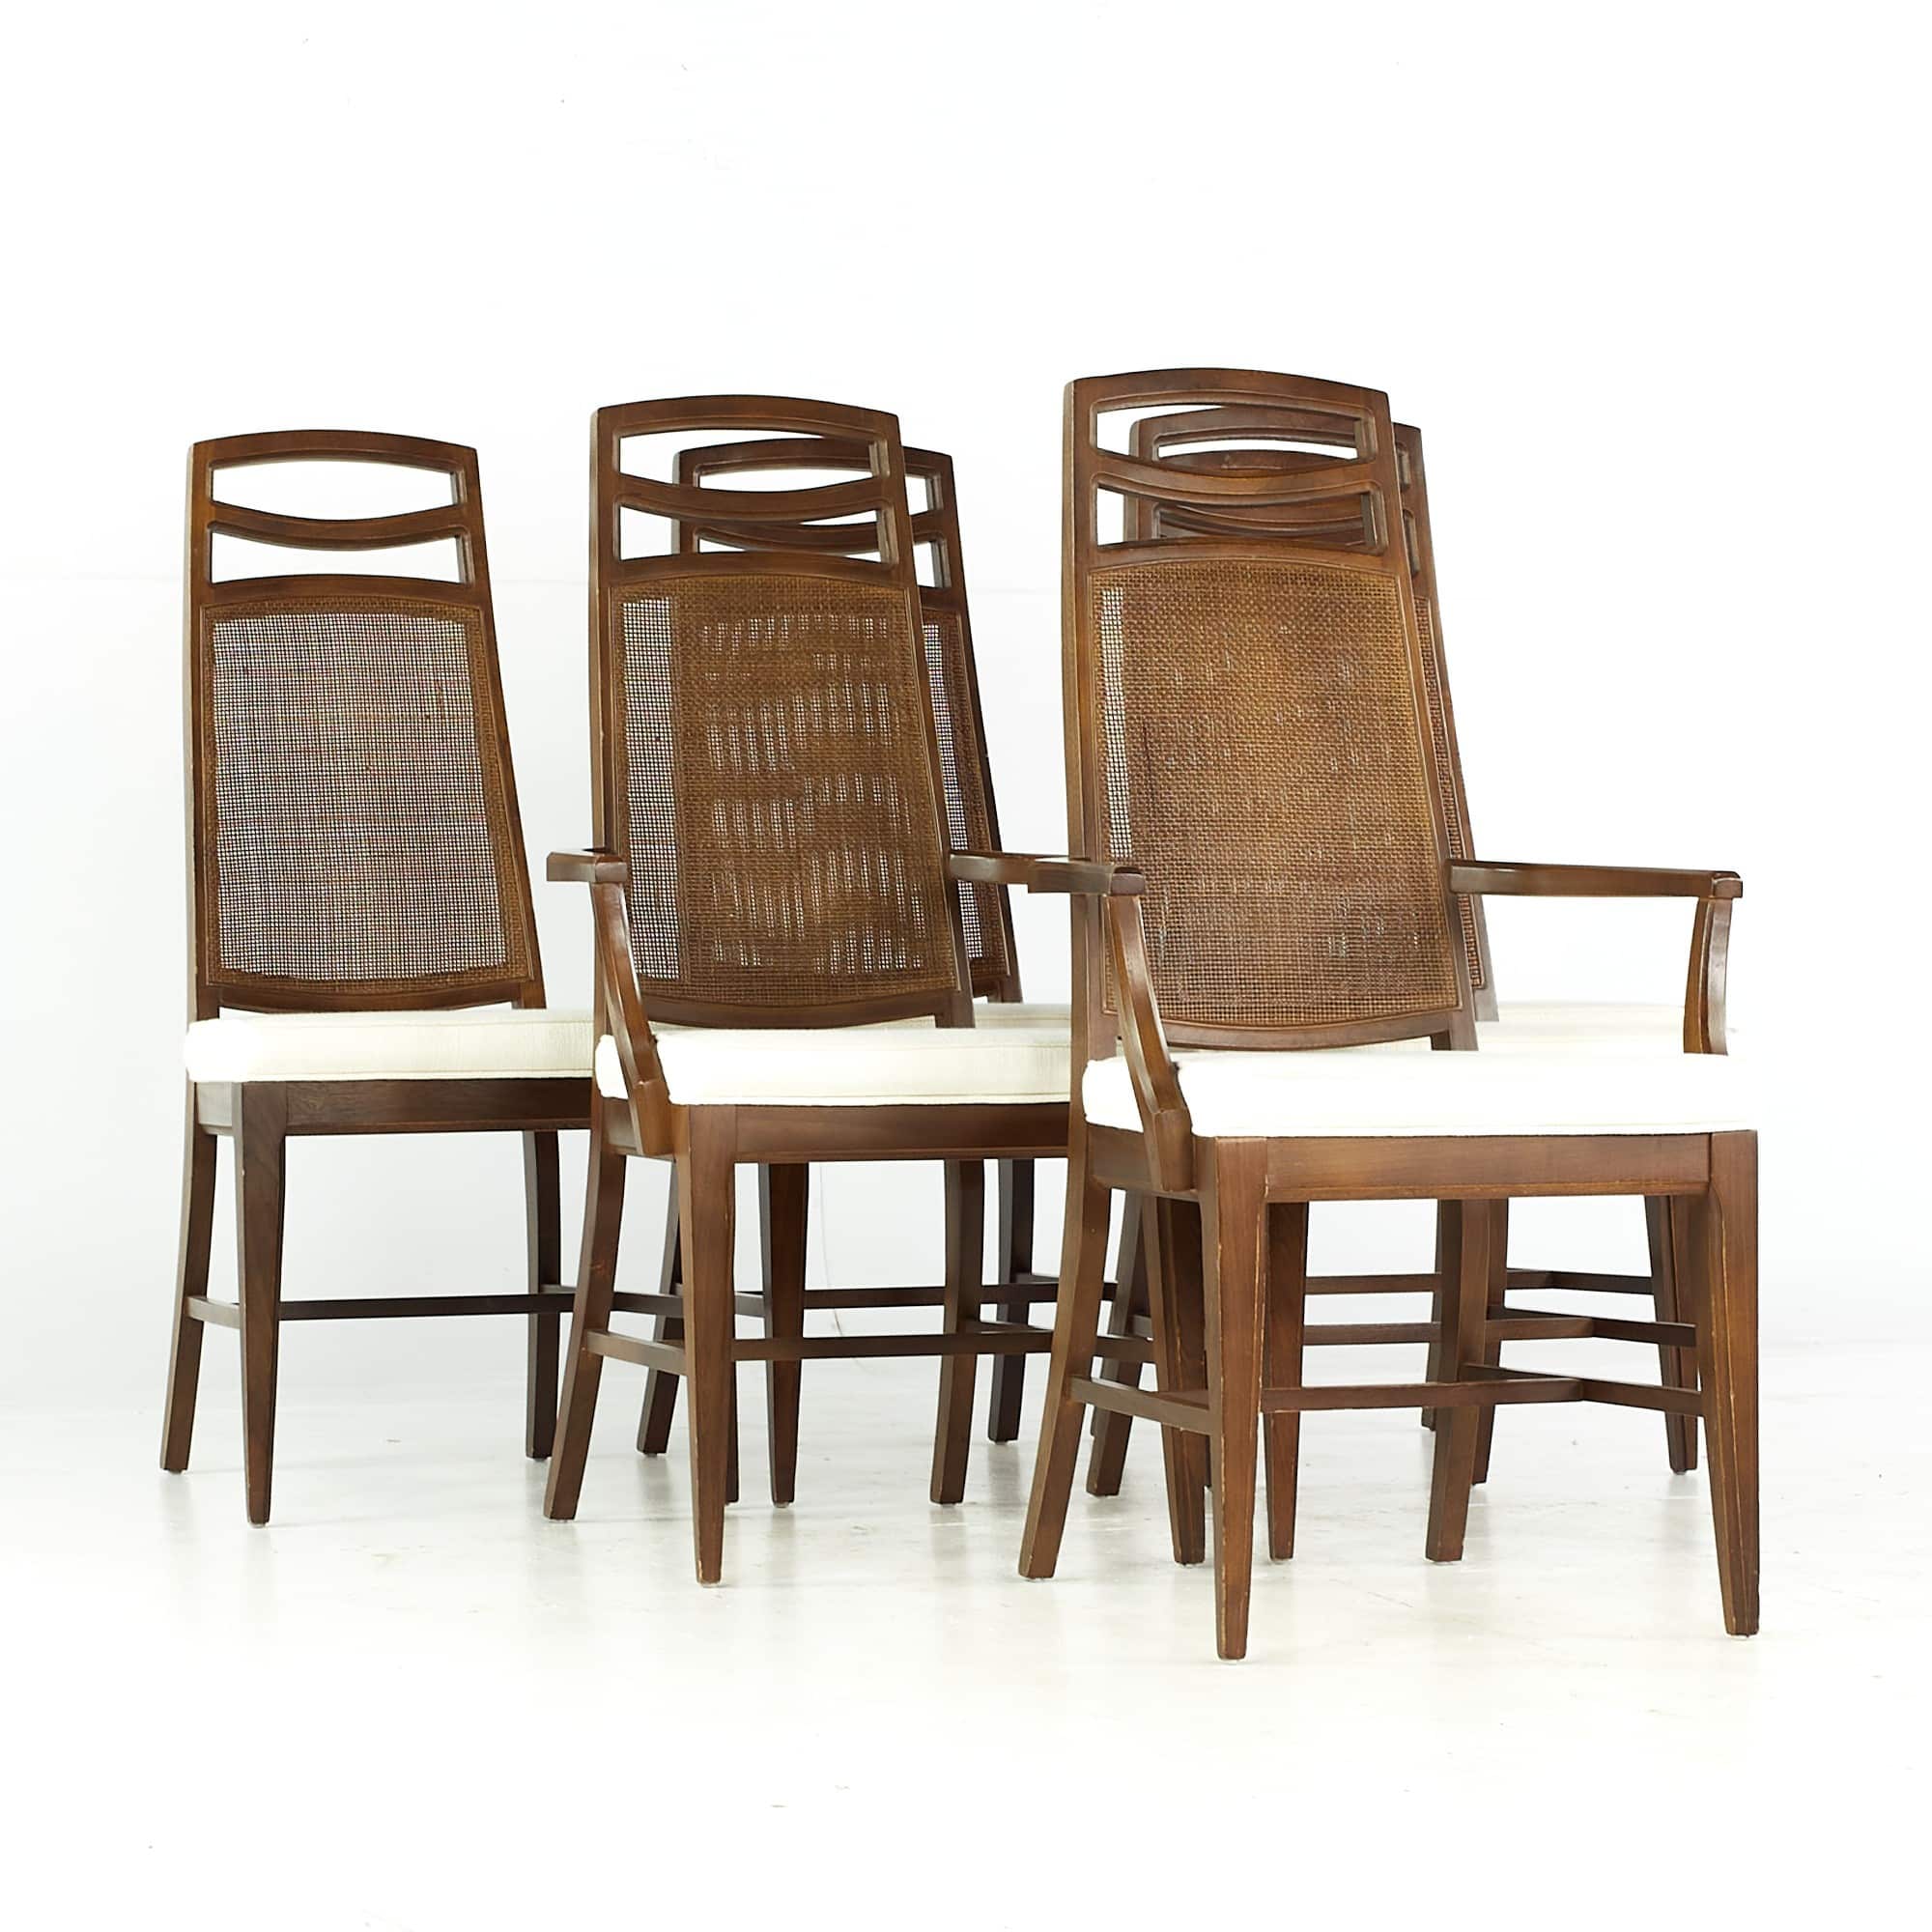 United Mid Century Walnut and Cane Dining Chairs - Set of 6